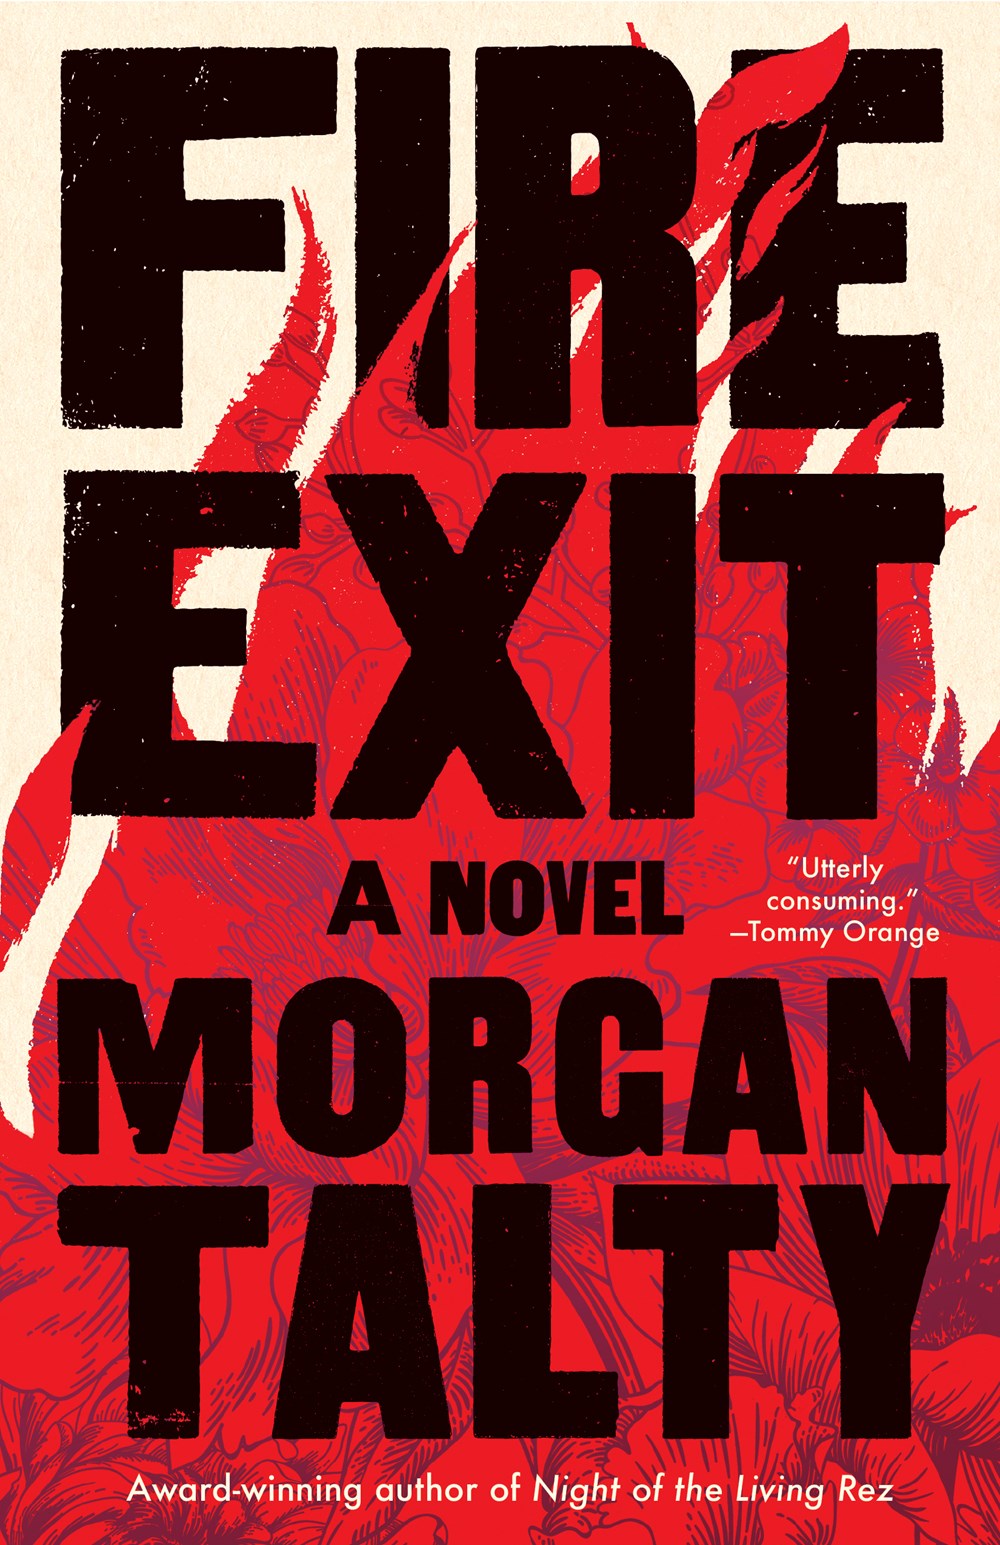 Fire Exit by Morgan Talty